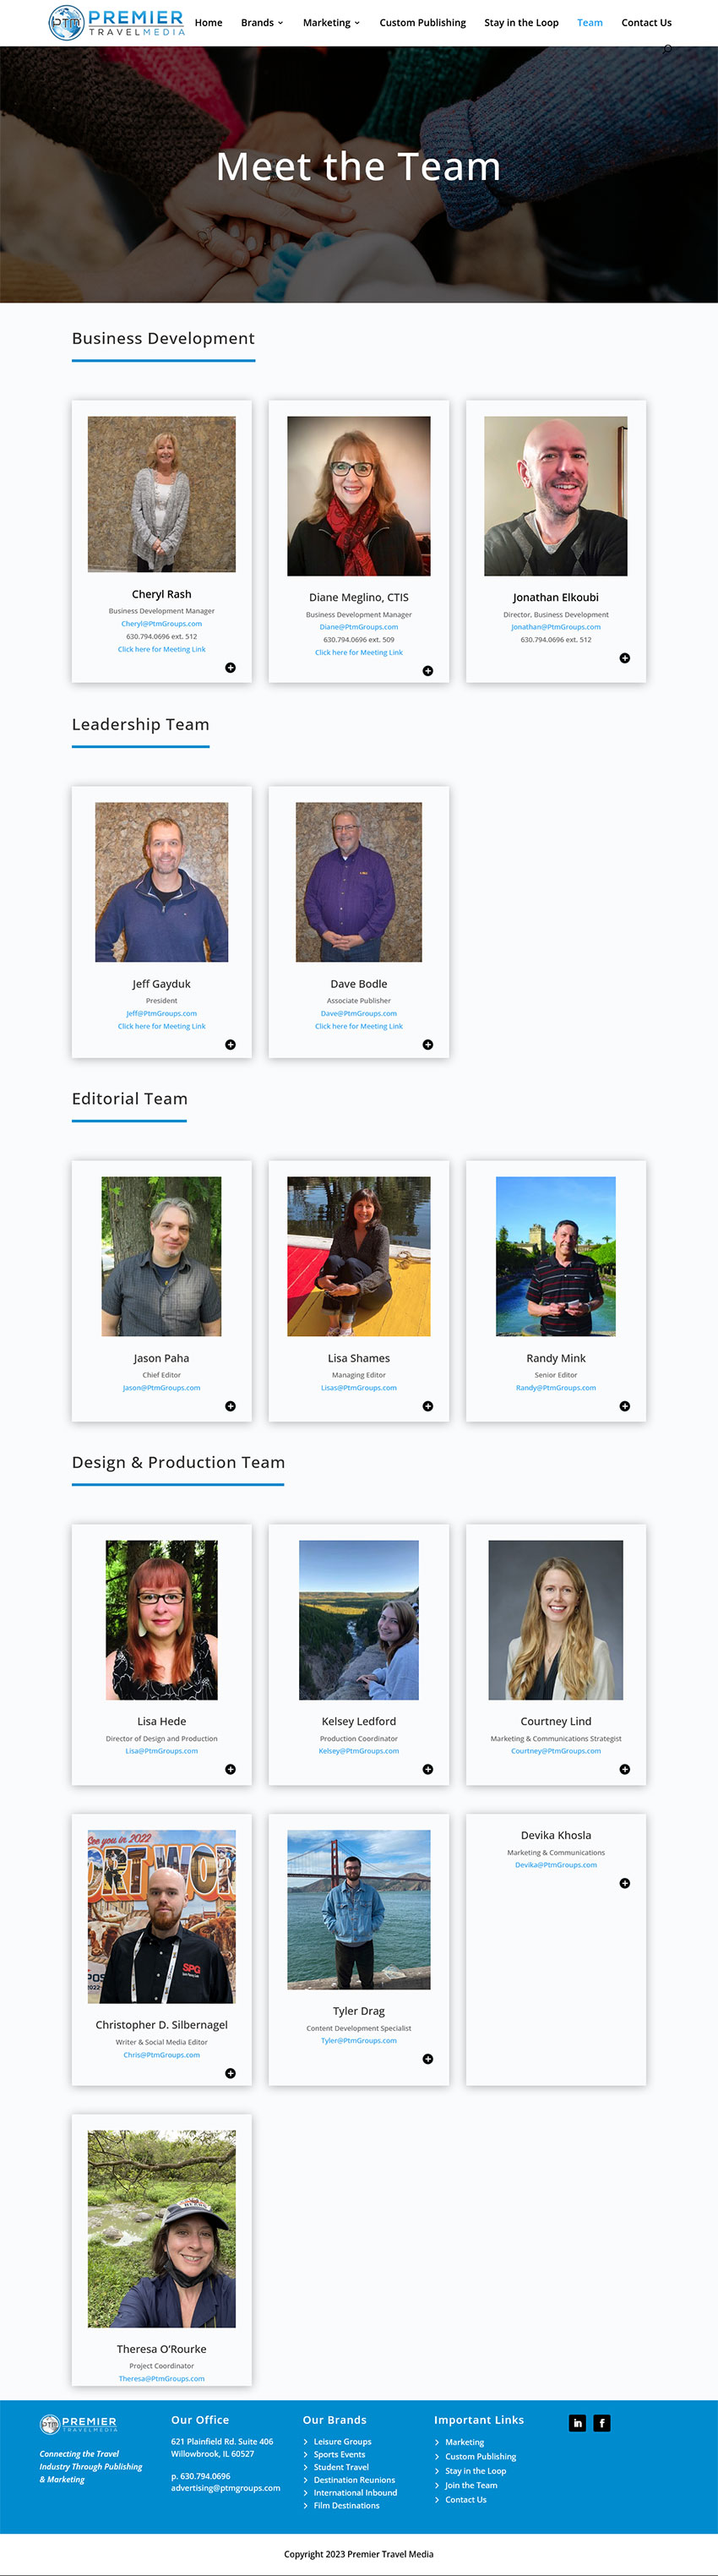 Meet The team page